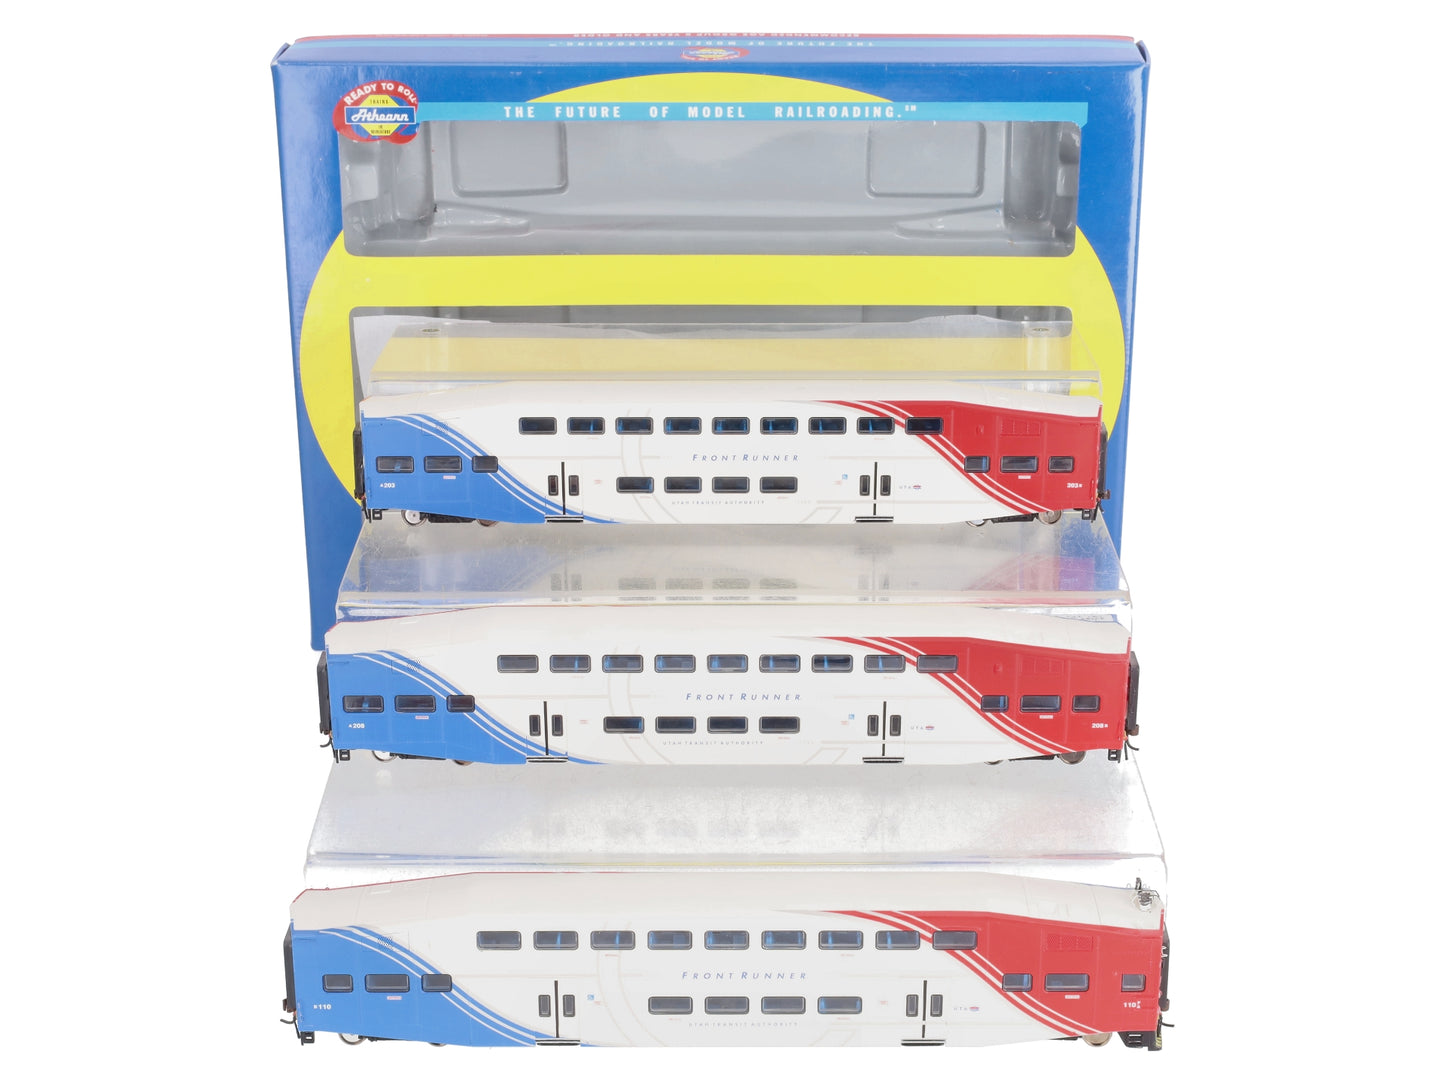 Athearn 25914 HO Utah "Front Runner" Bombardier Control Coach Cars (Set of 3) EX/Box